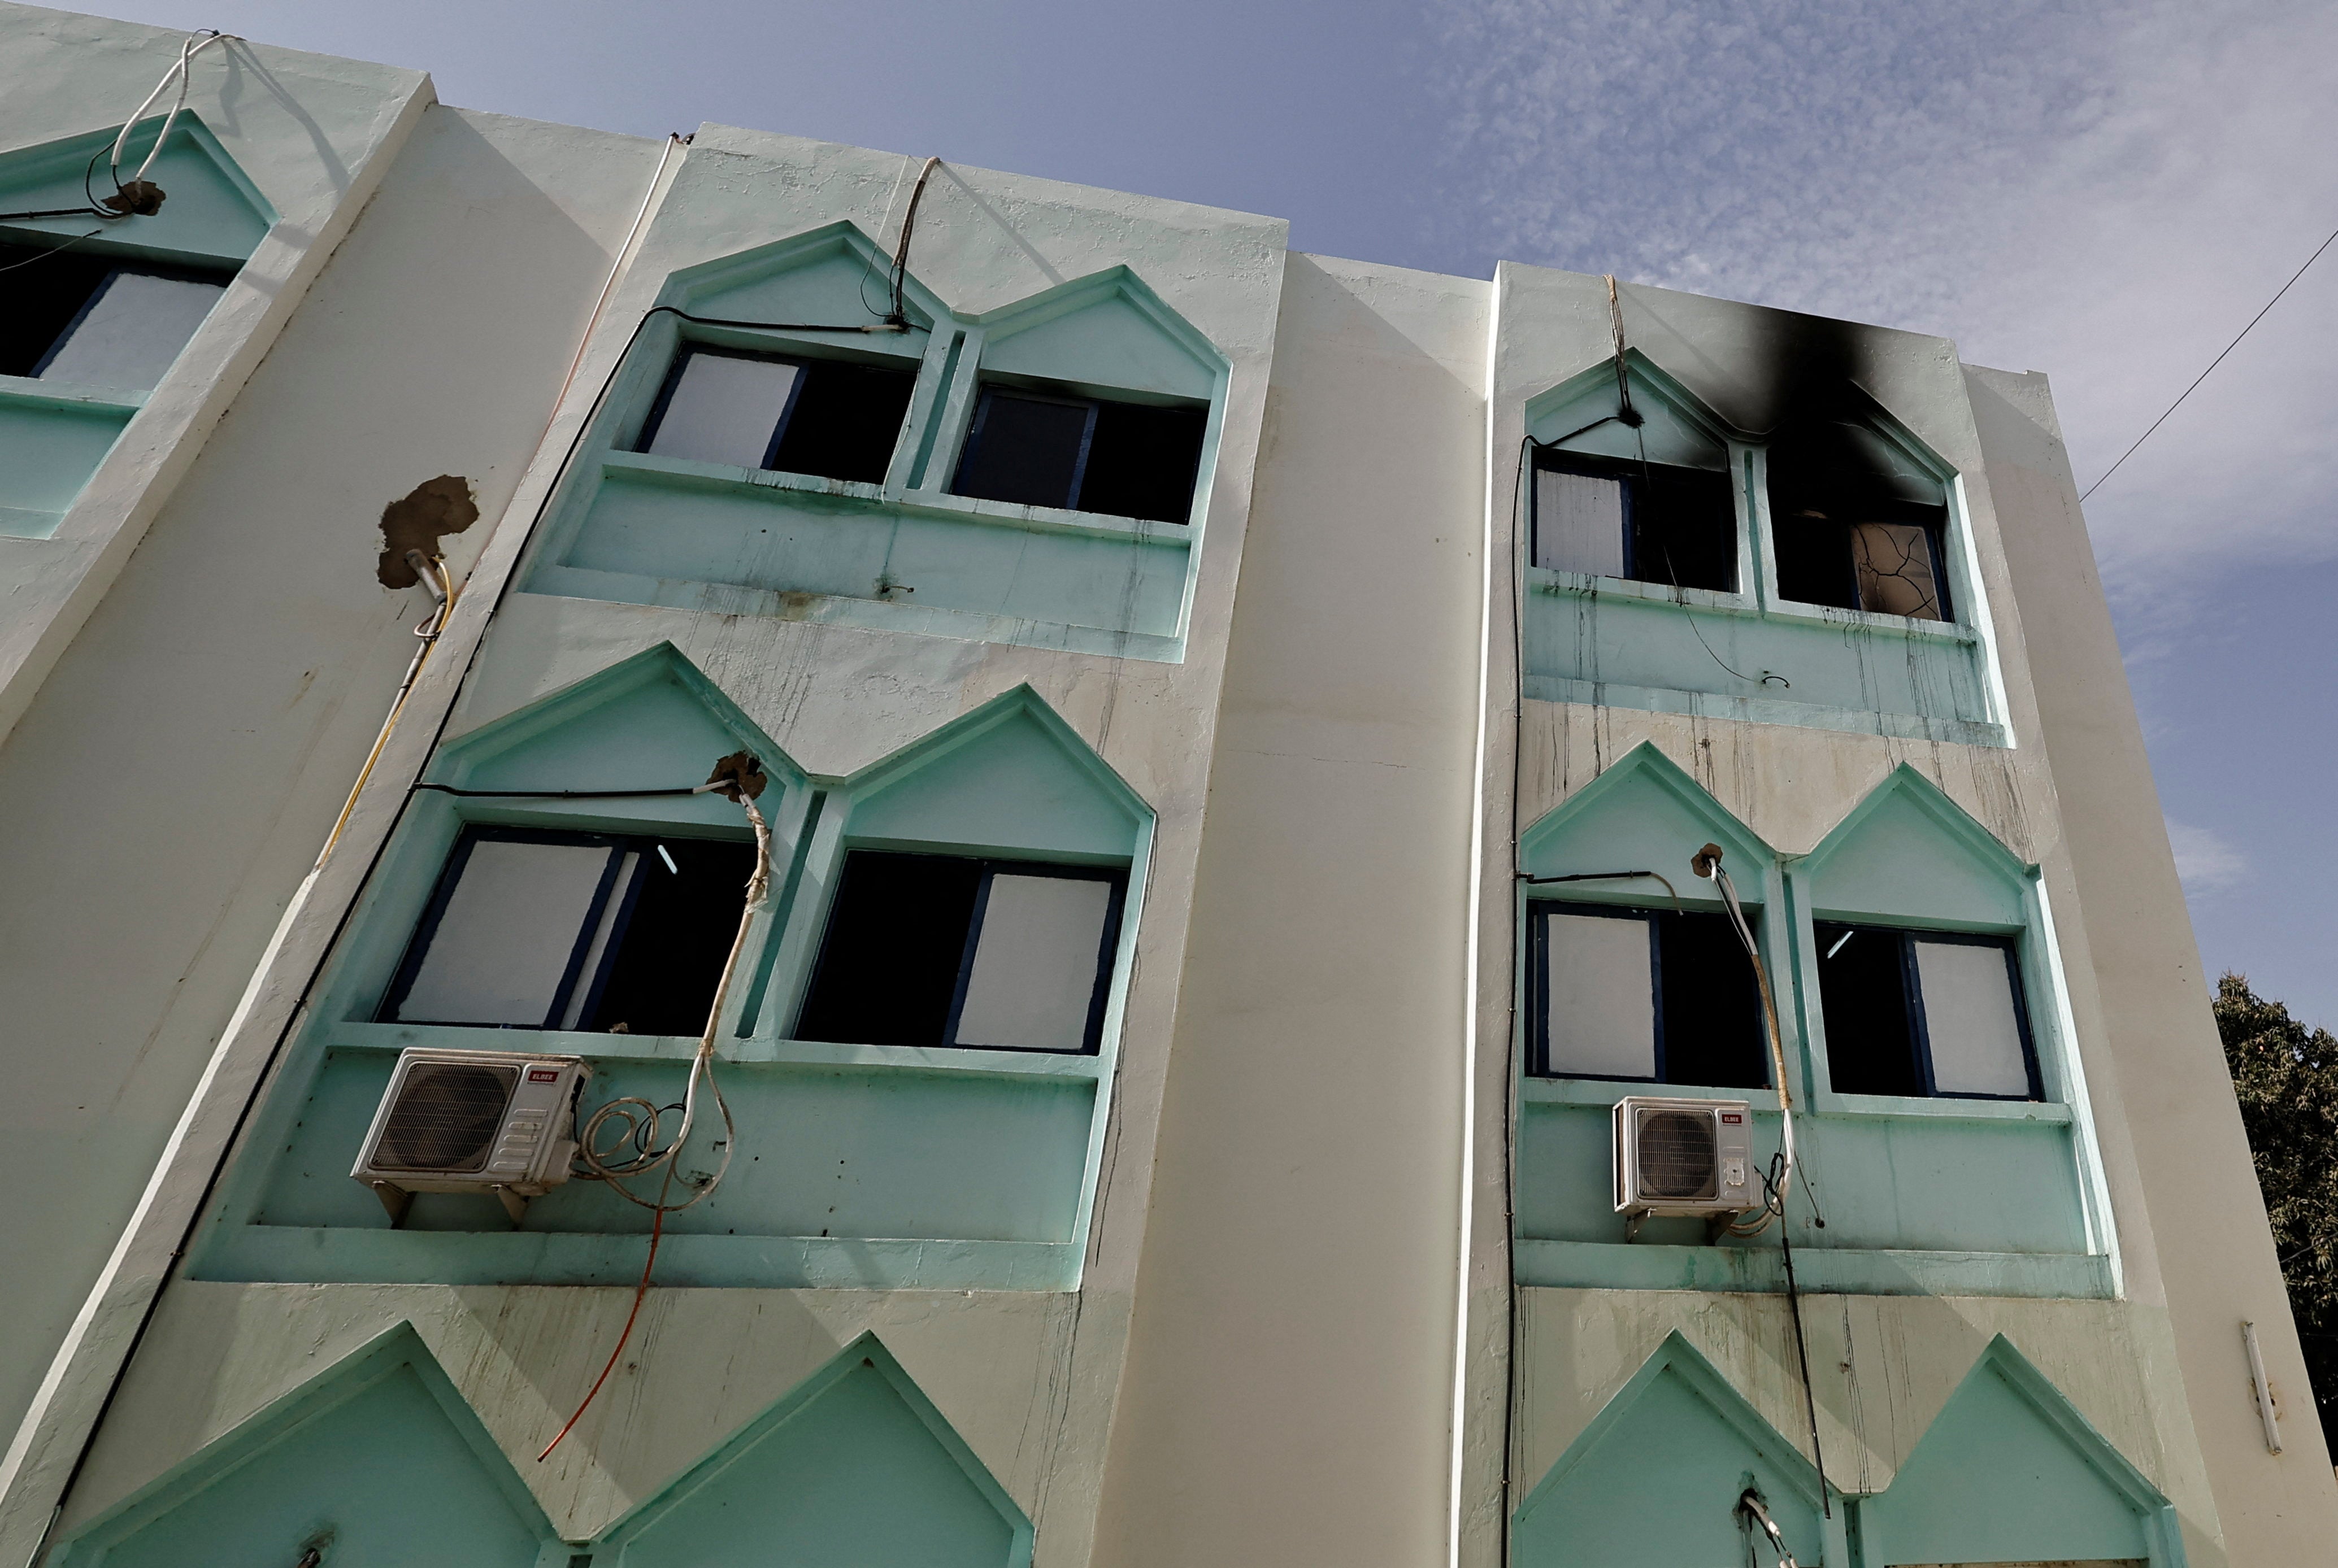 Charred windows at the Abdoul Aziz Sy Dabakh hospital in Tivaouane where 11 babies died